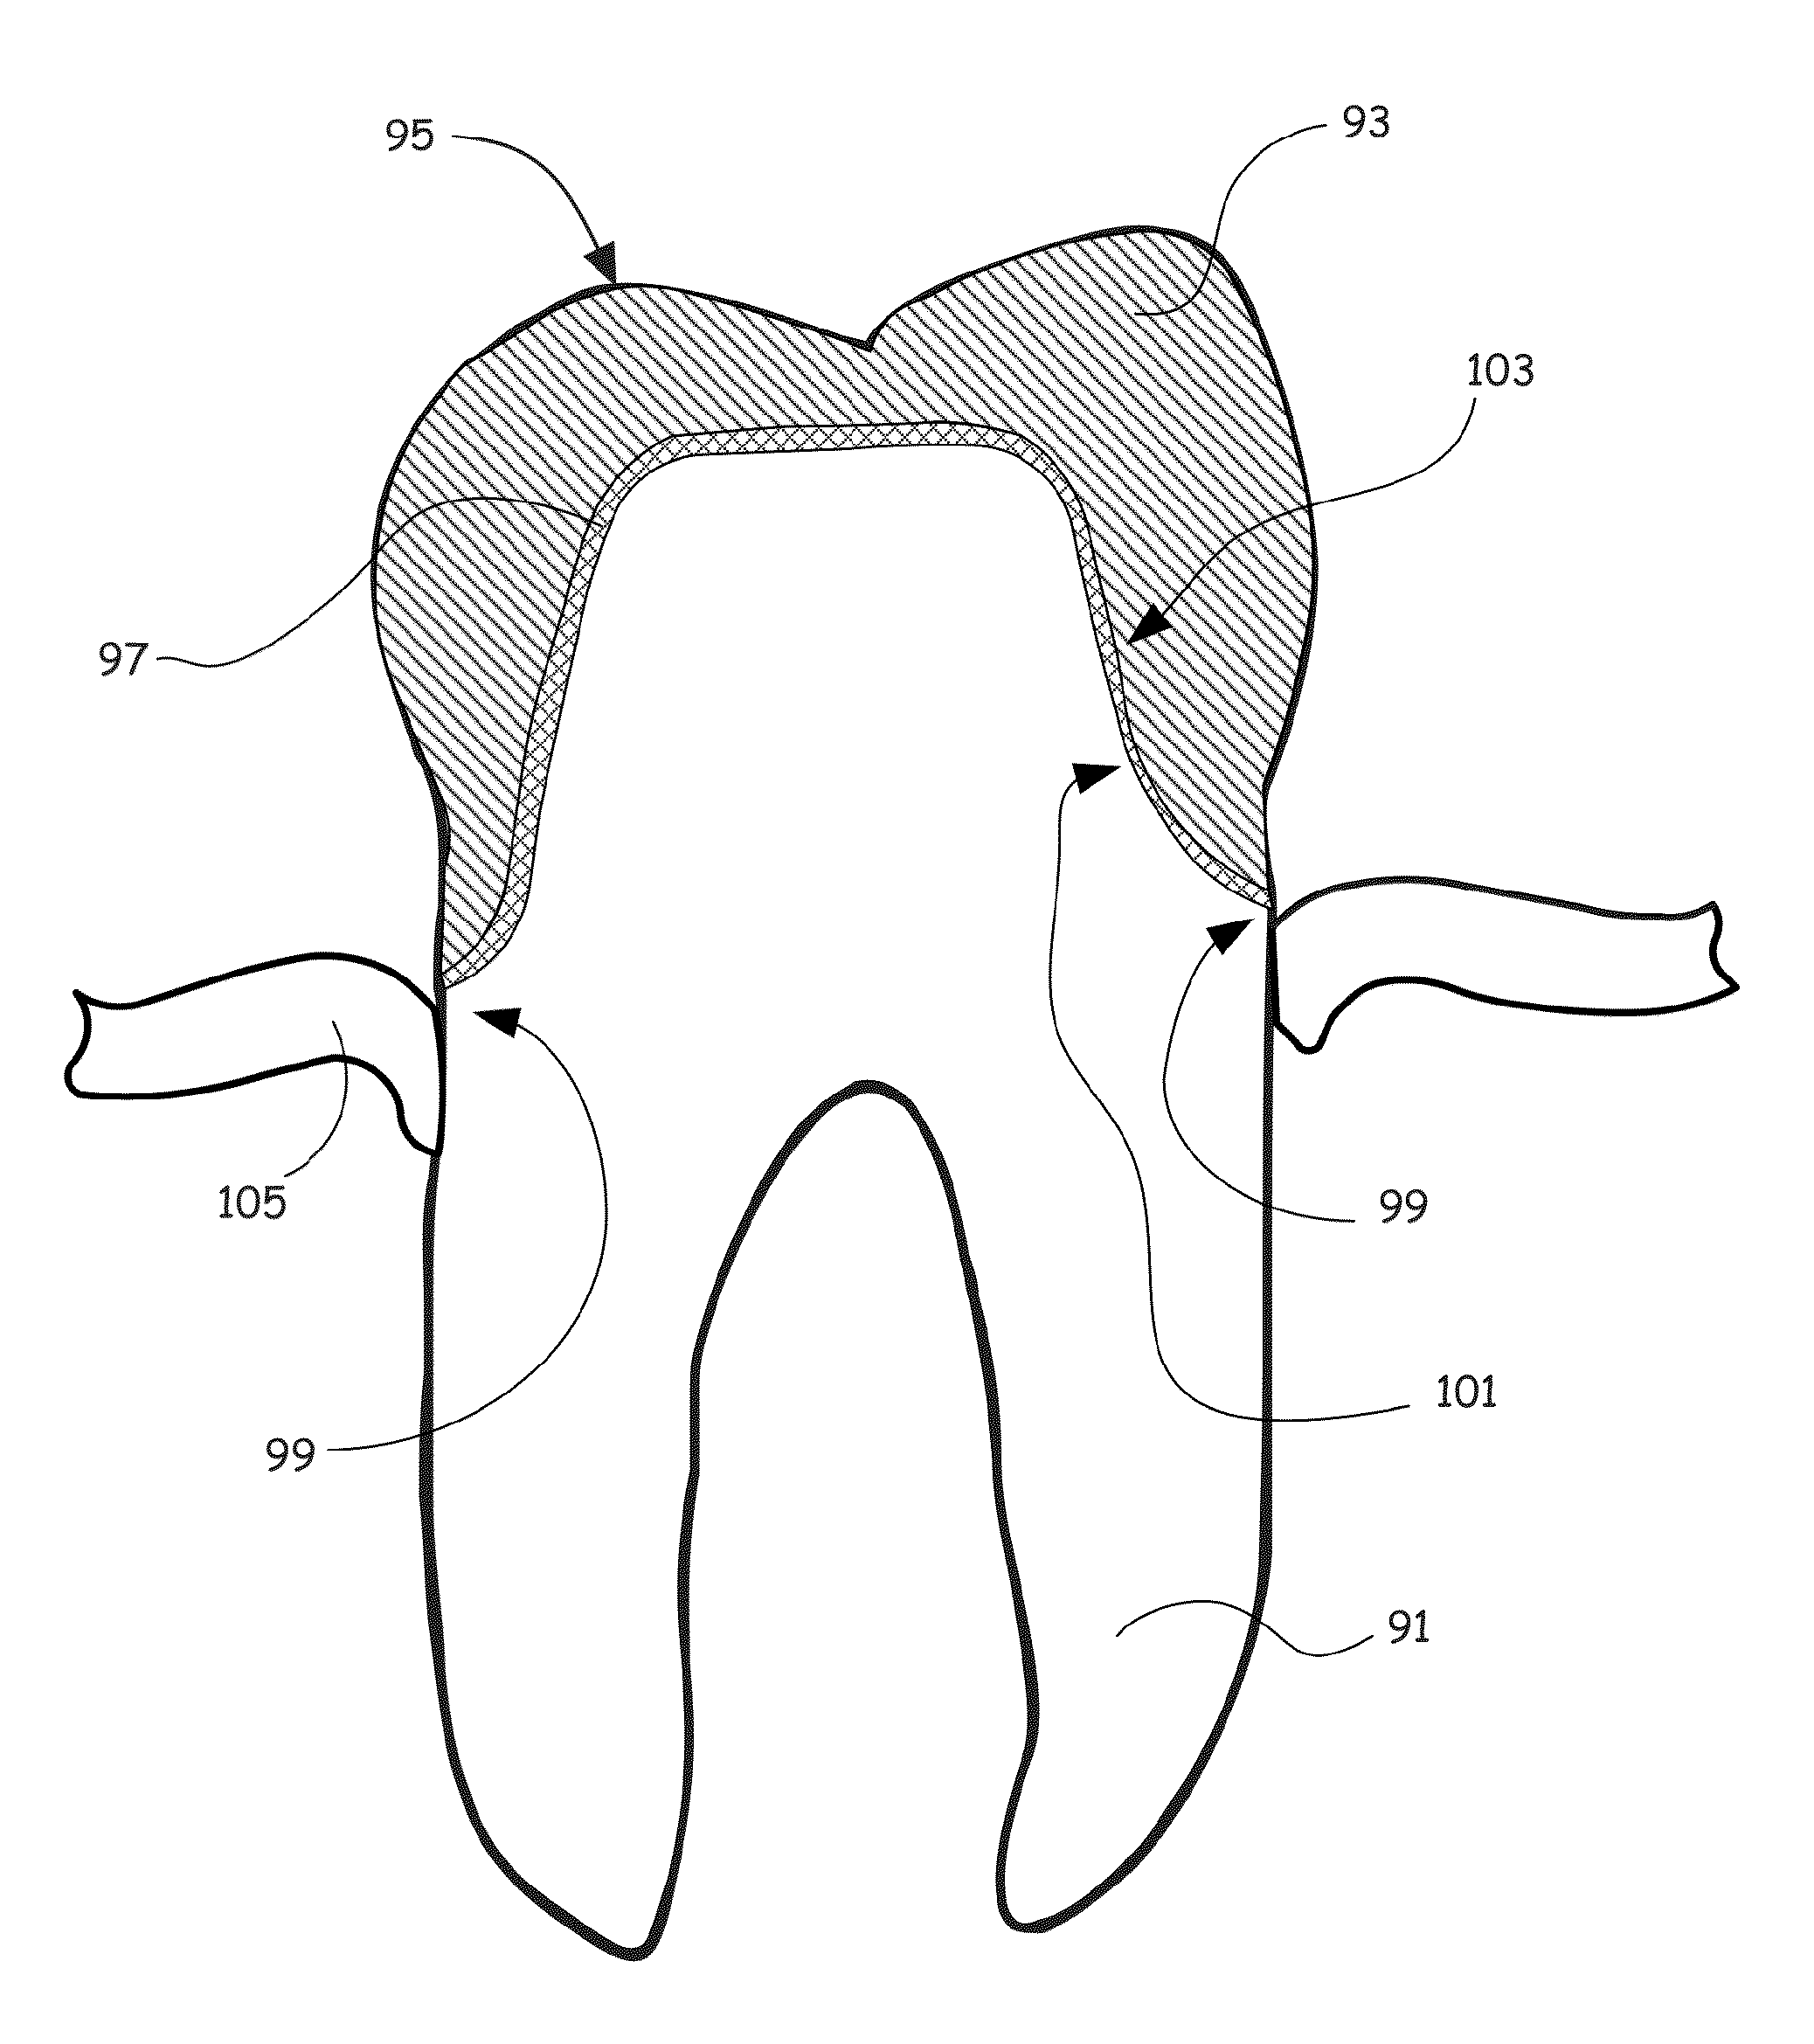 Dental Implant Assembly, Implant, and Prosthesis to Replace a Nonfunctional Natural Tooth and Related Methods